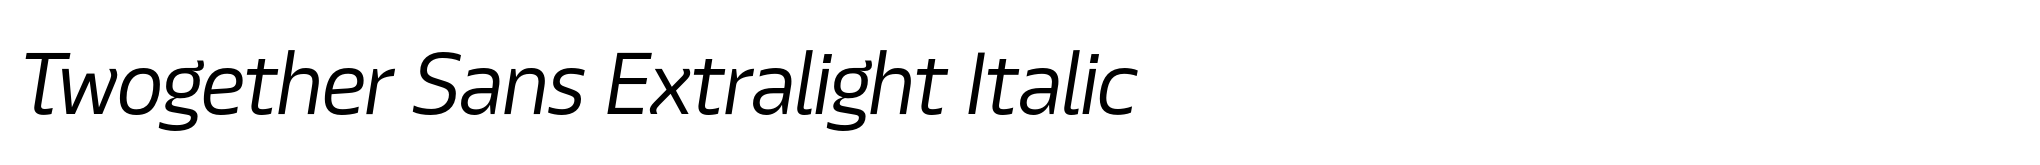 Twogether Sans Extralight Italic image